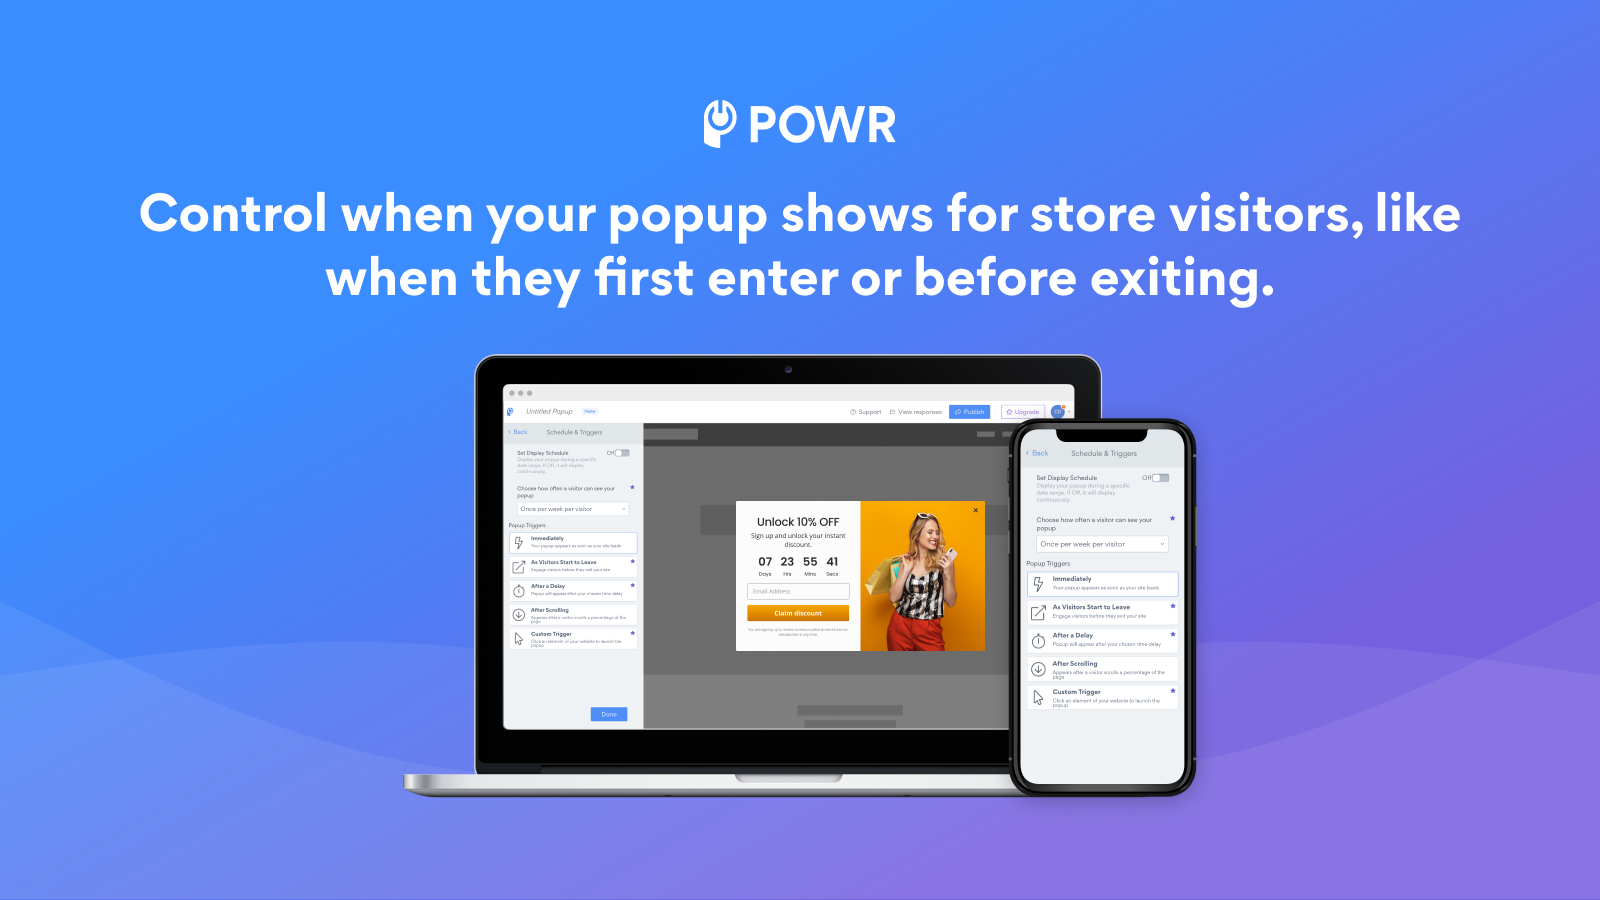 Control when your popup shows for store visitors.